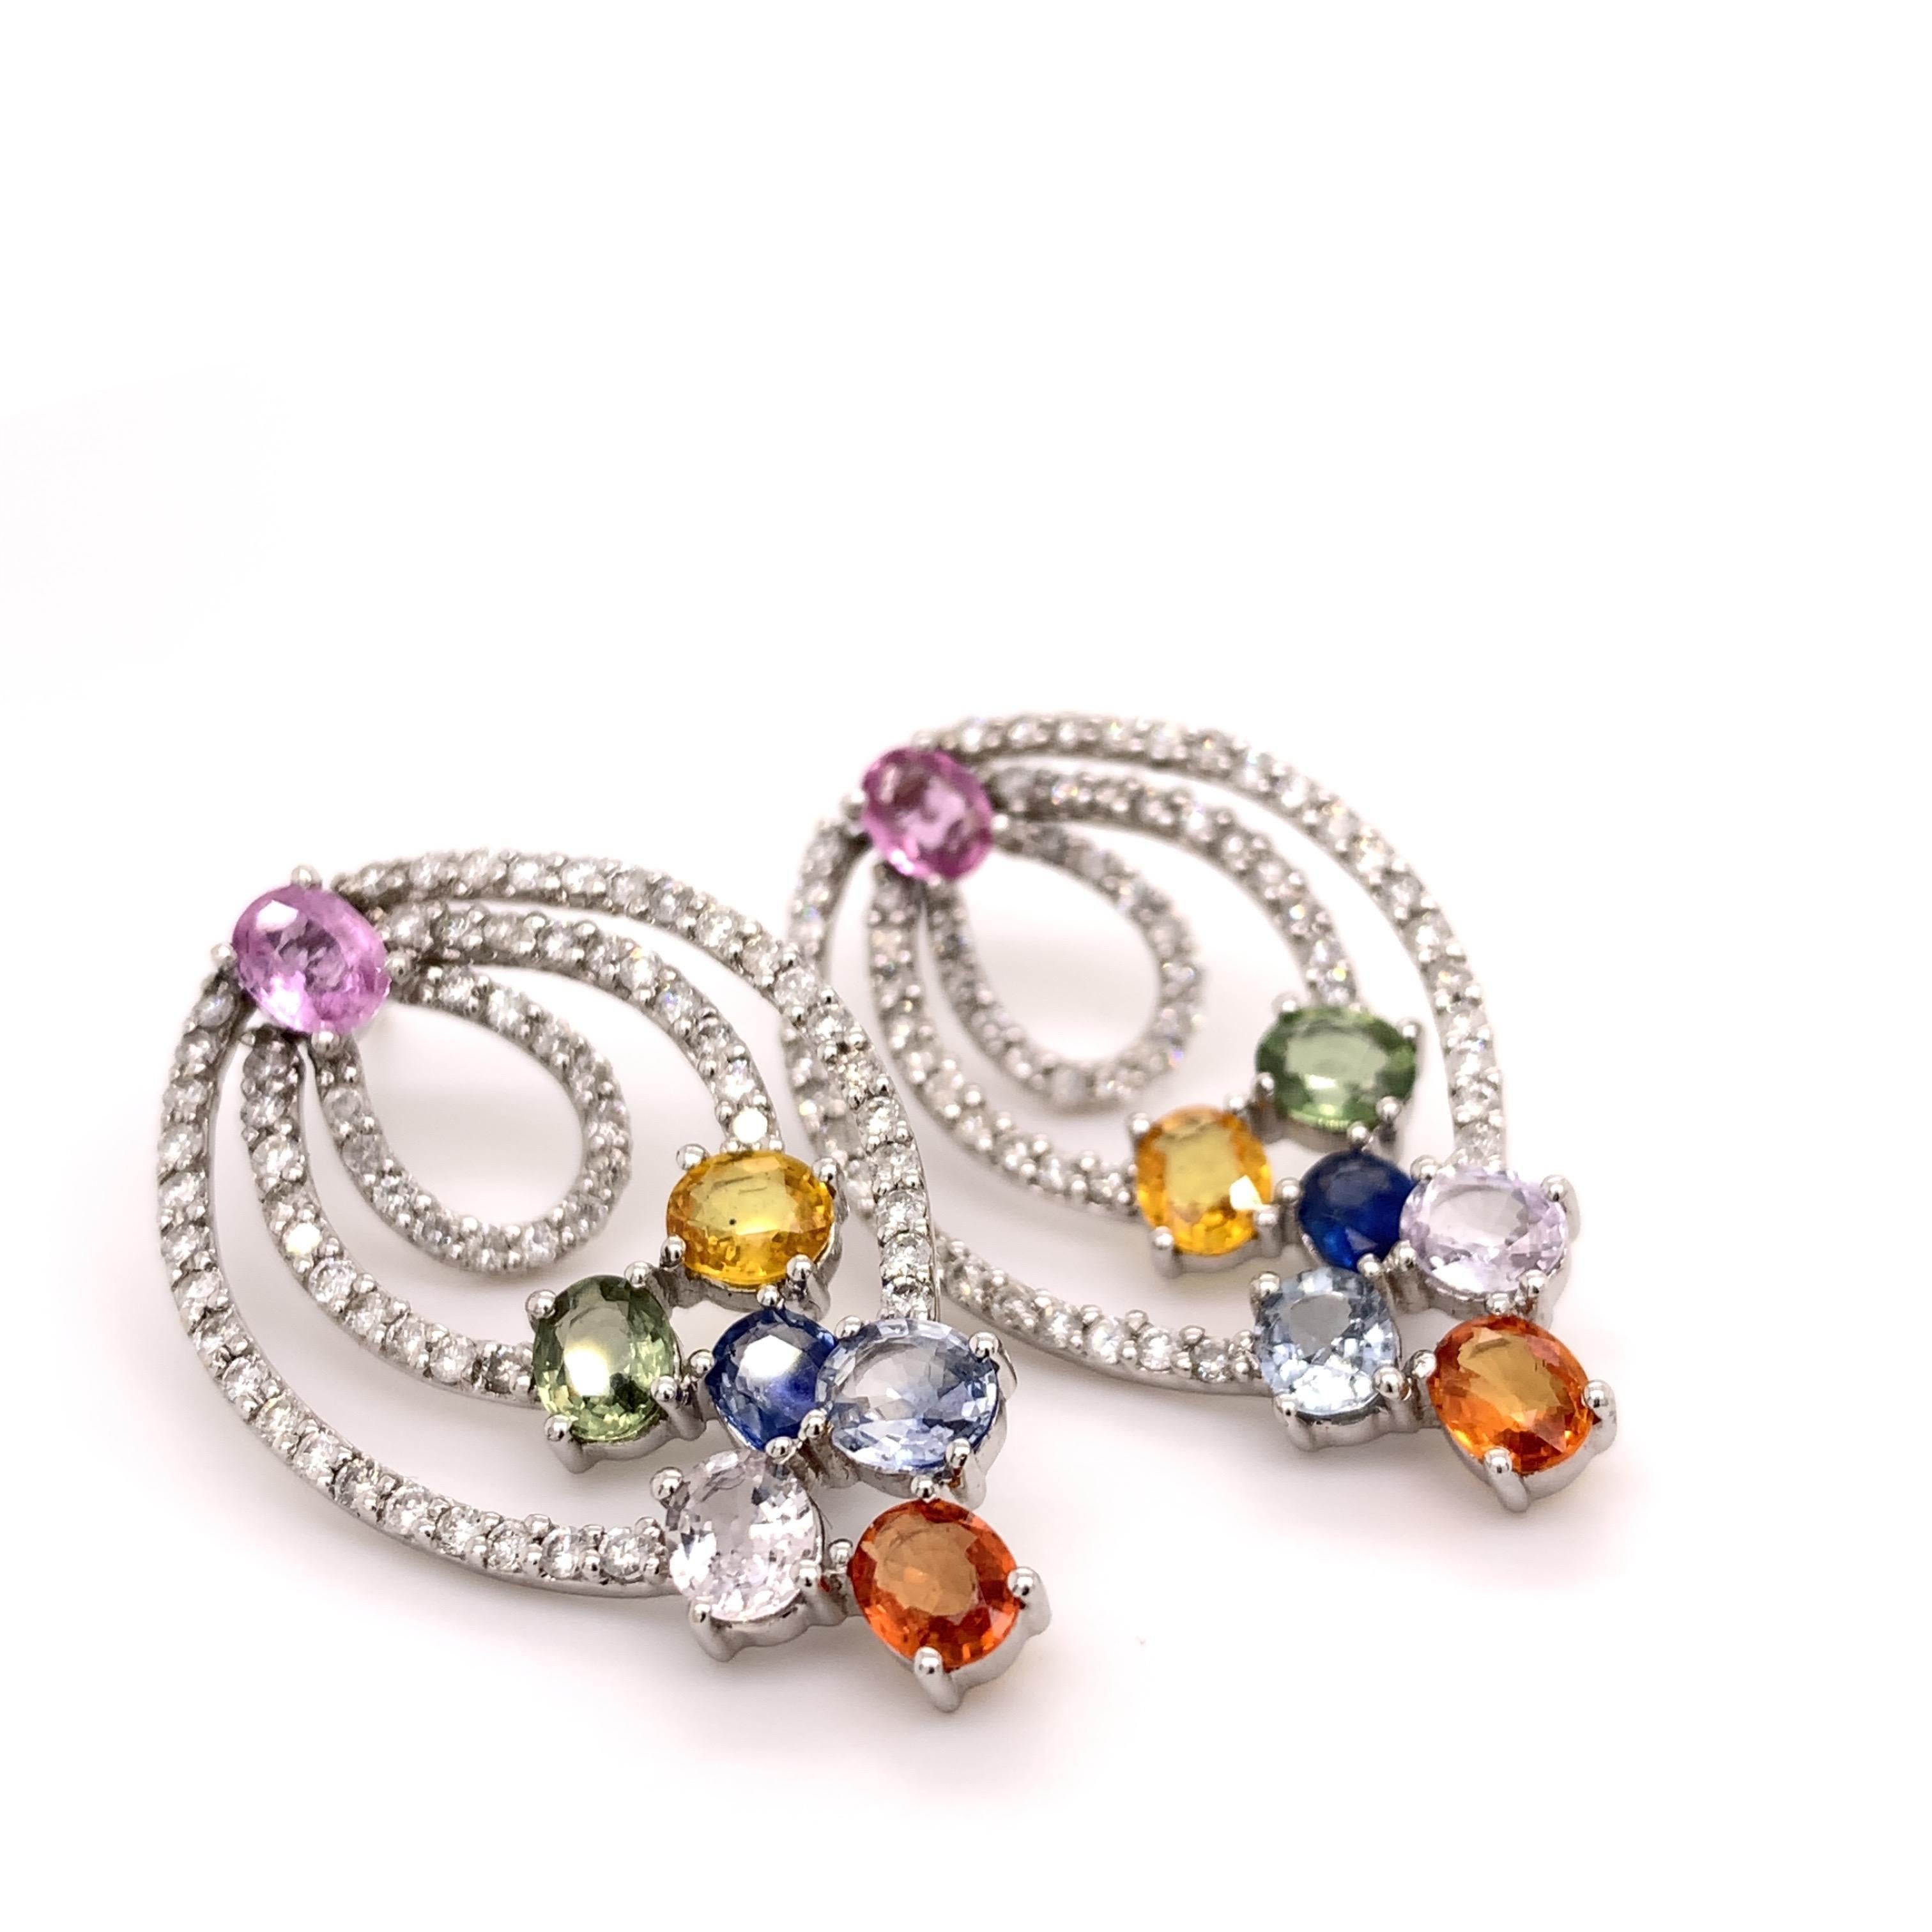 Glamorous multicolor sapphire diamond earrings. High brilliance, oval faceted, 5.89 carats multicolor natural sapphires earrings, accented with three dangling rows of round brilliant cut diamonds. Handcrafted design set in 14 karats white gold with